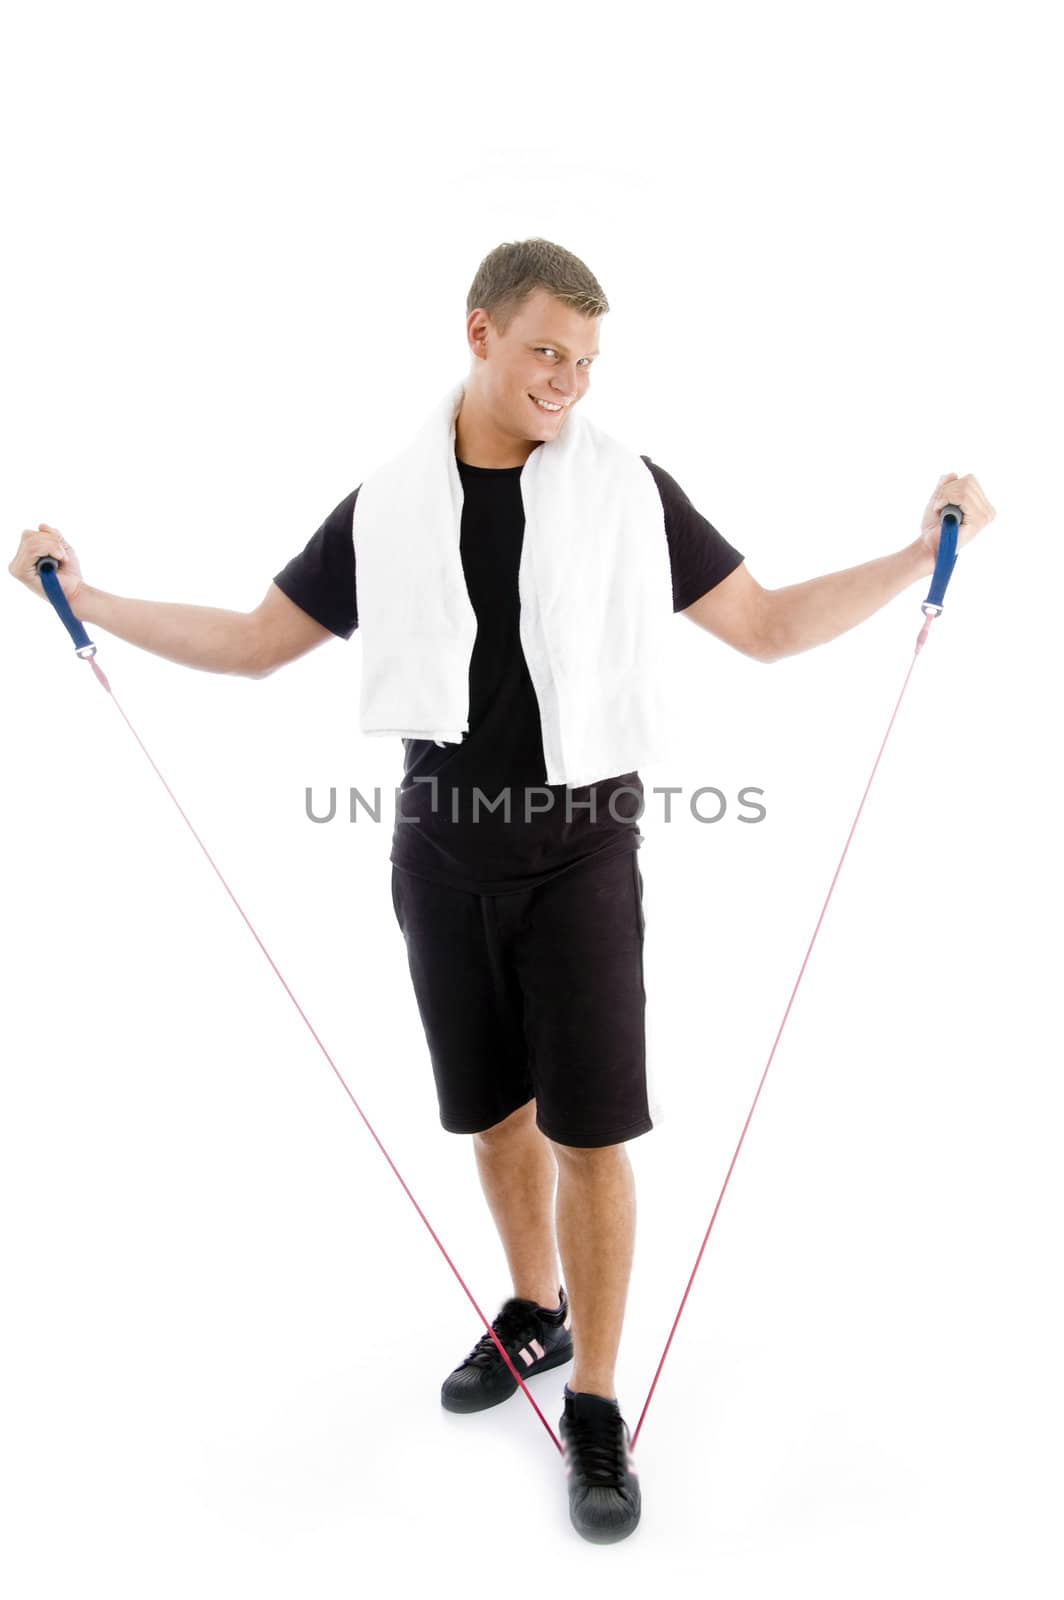 healthy man stretching exercise rope by imagerymajestic